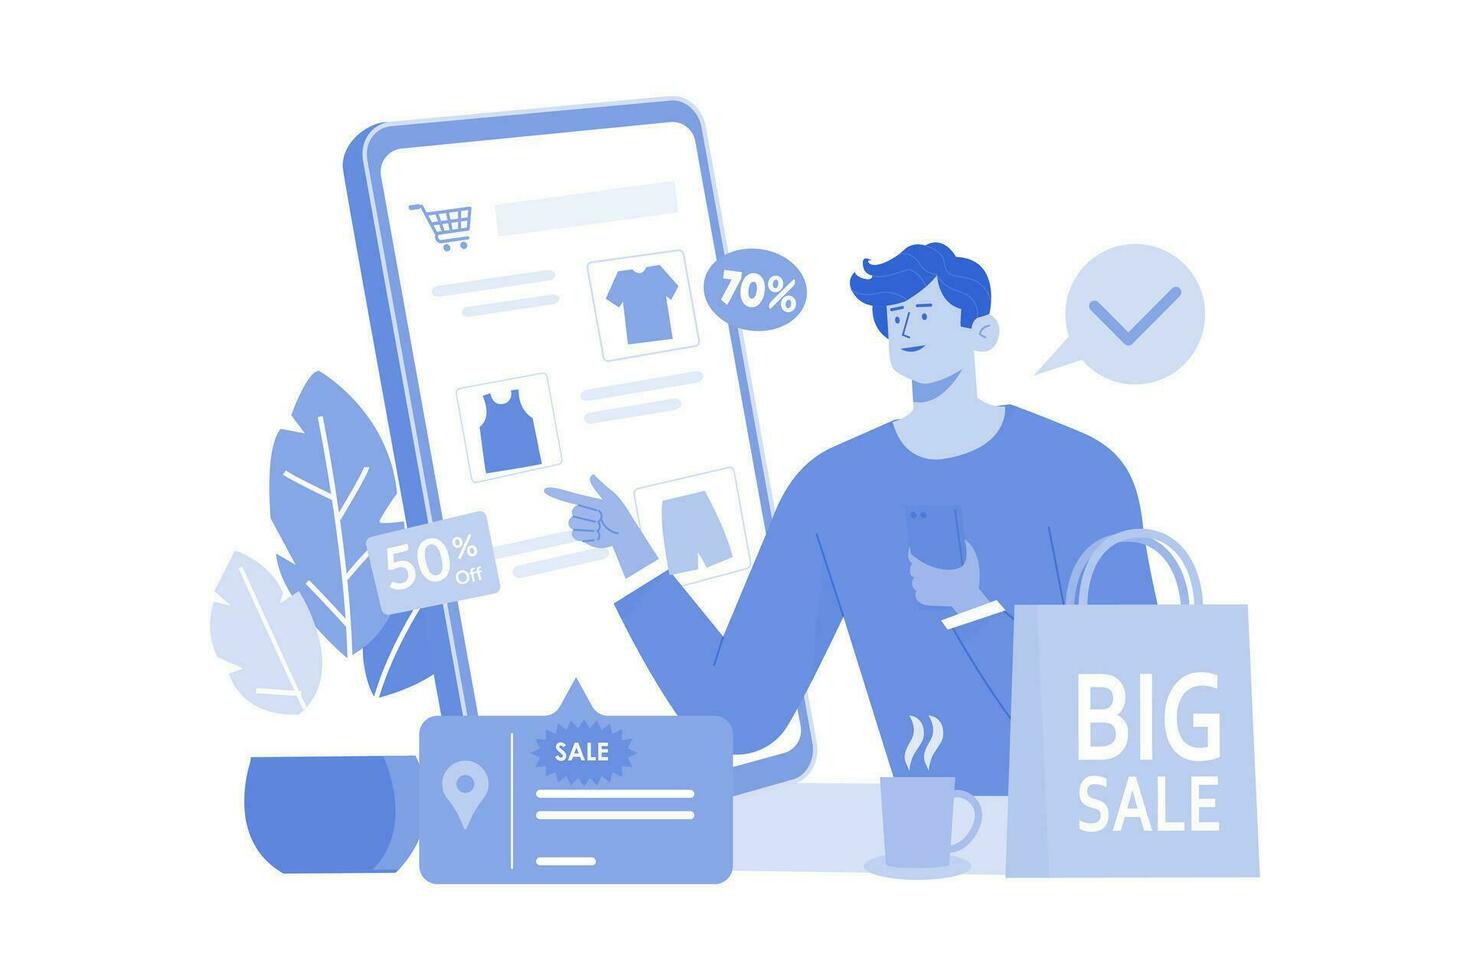 Man searching discount on online store vector